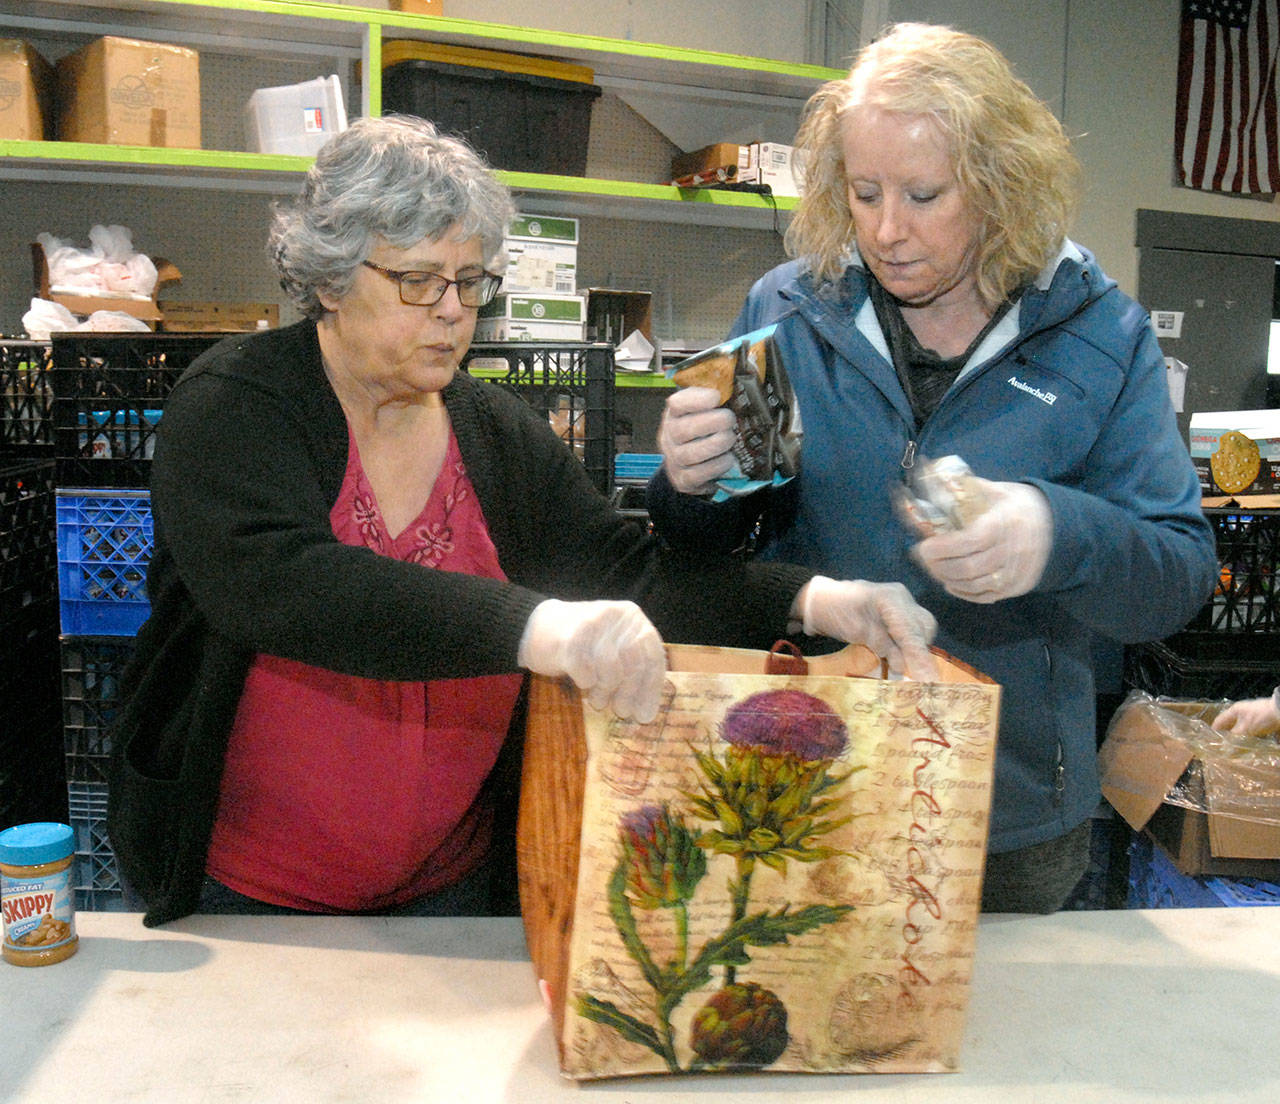 Kiwanis Club members Martha Standley, left, and Carla Sue fill bags of food for needy families at the Port Angeles Food Bank. (Keith Thorpe/Peninsula Daily News)